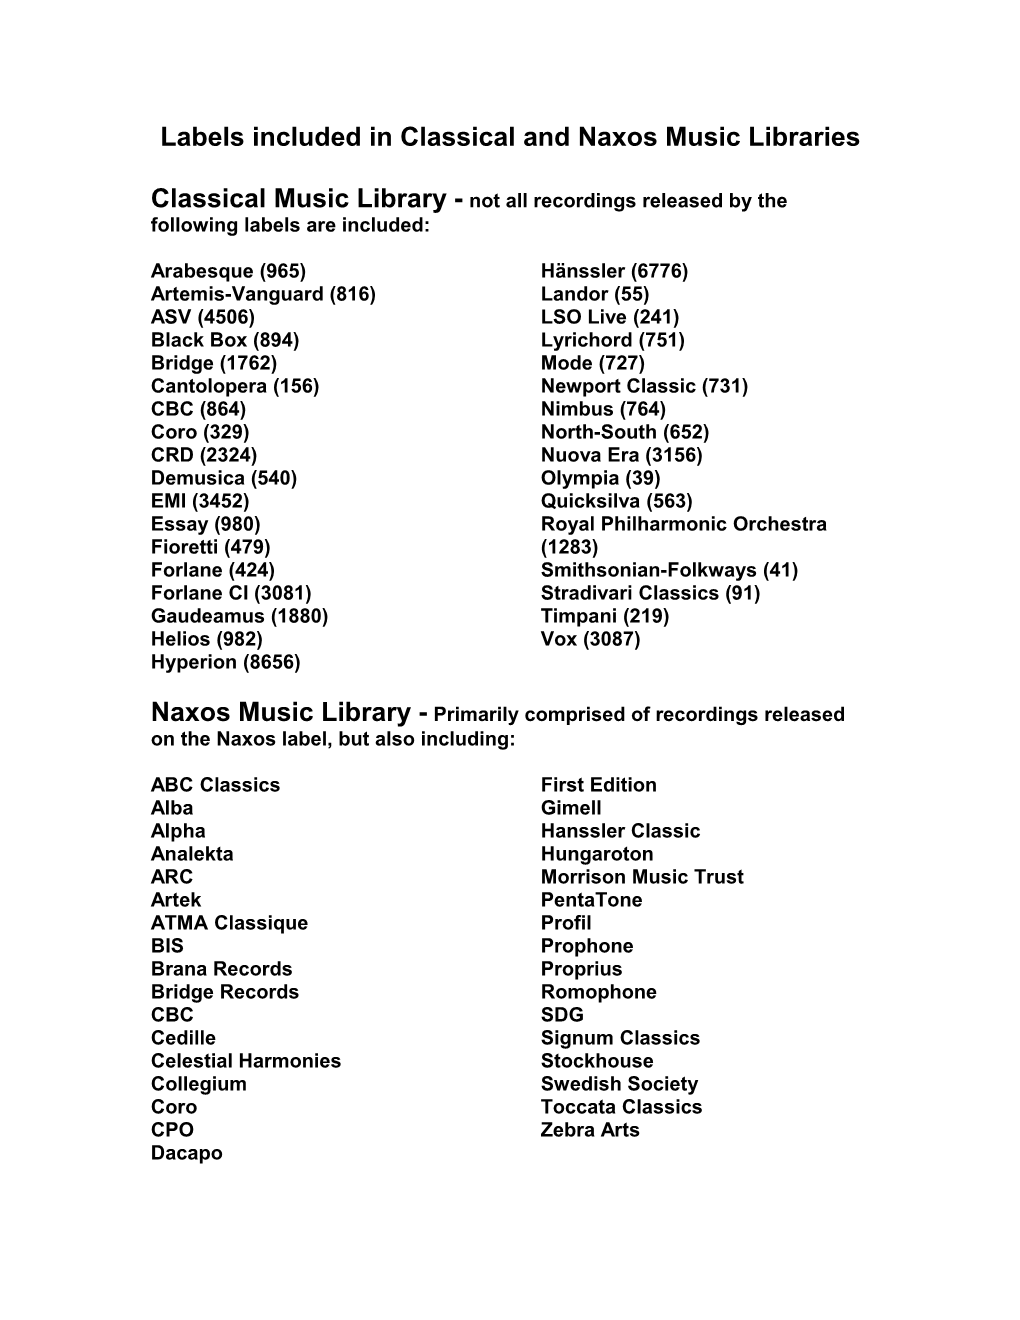 Labels Included in Classical and Naxos Music Libraries